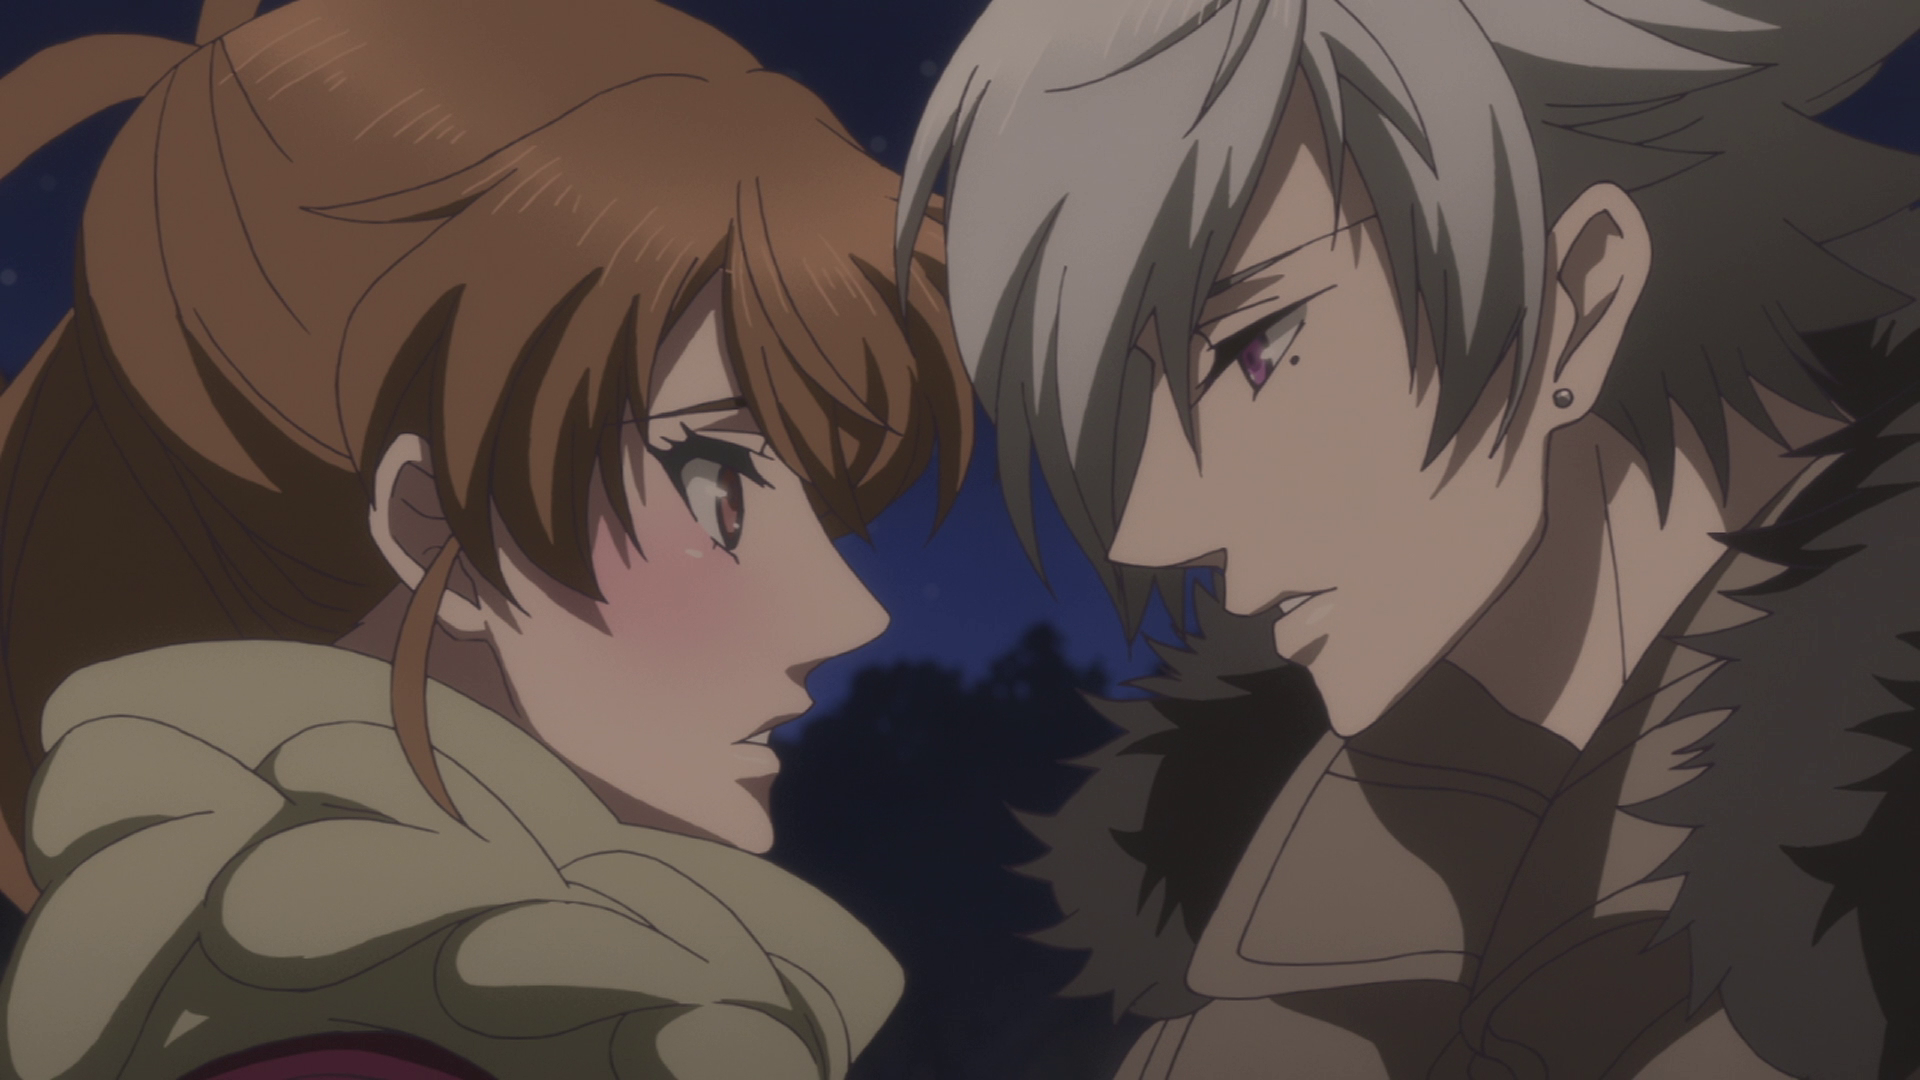 Brothers Conflict Review (Anime) - Rice Digital